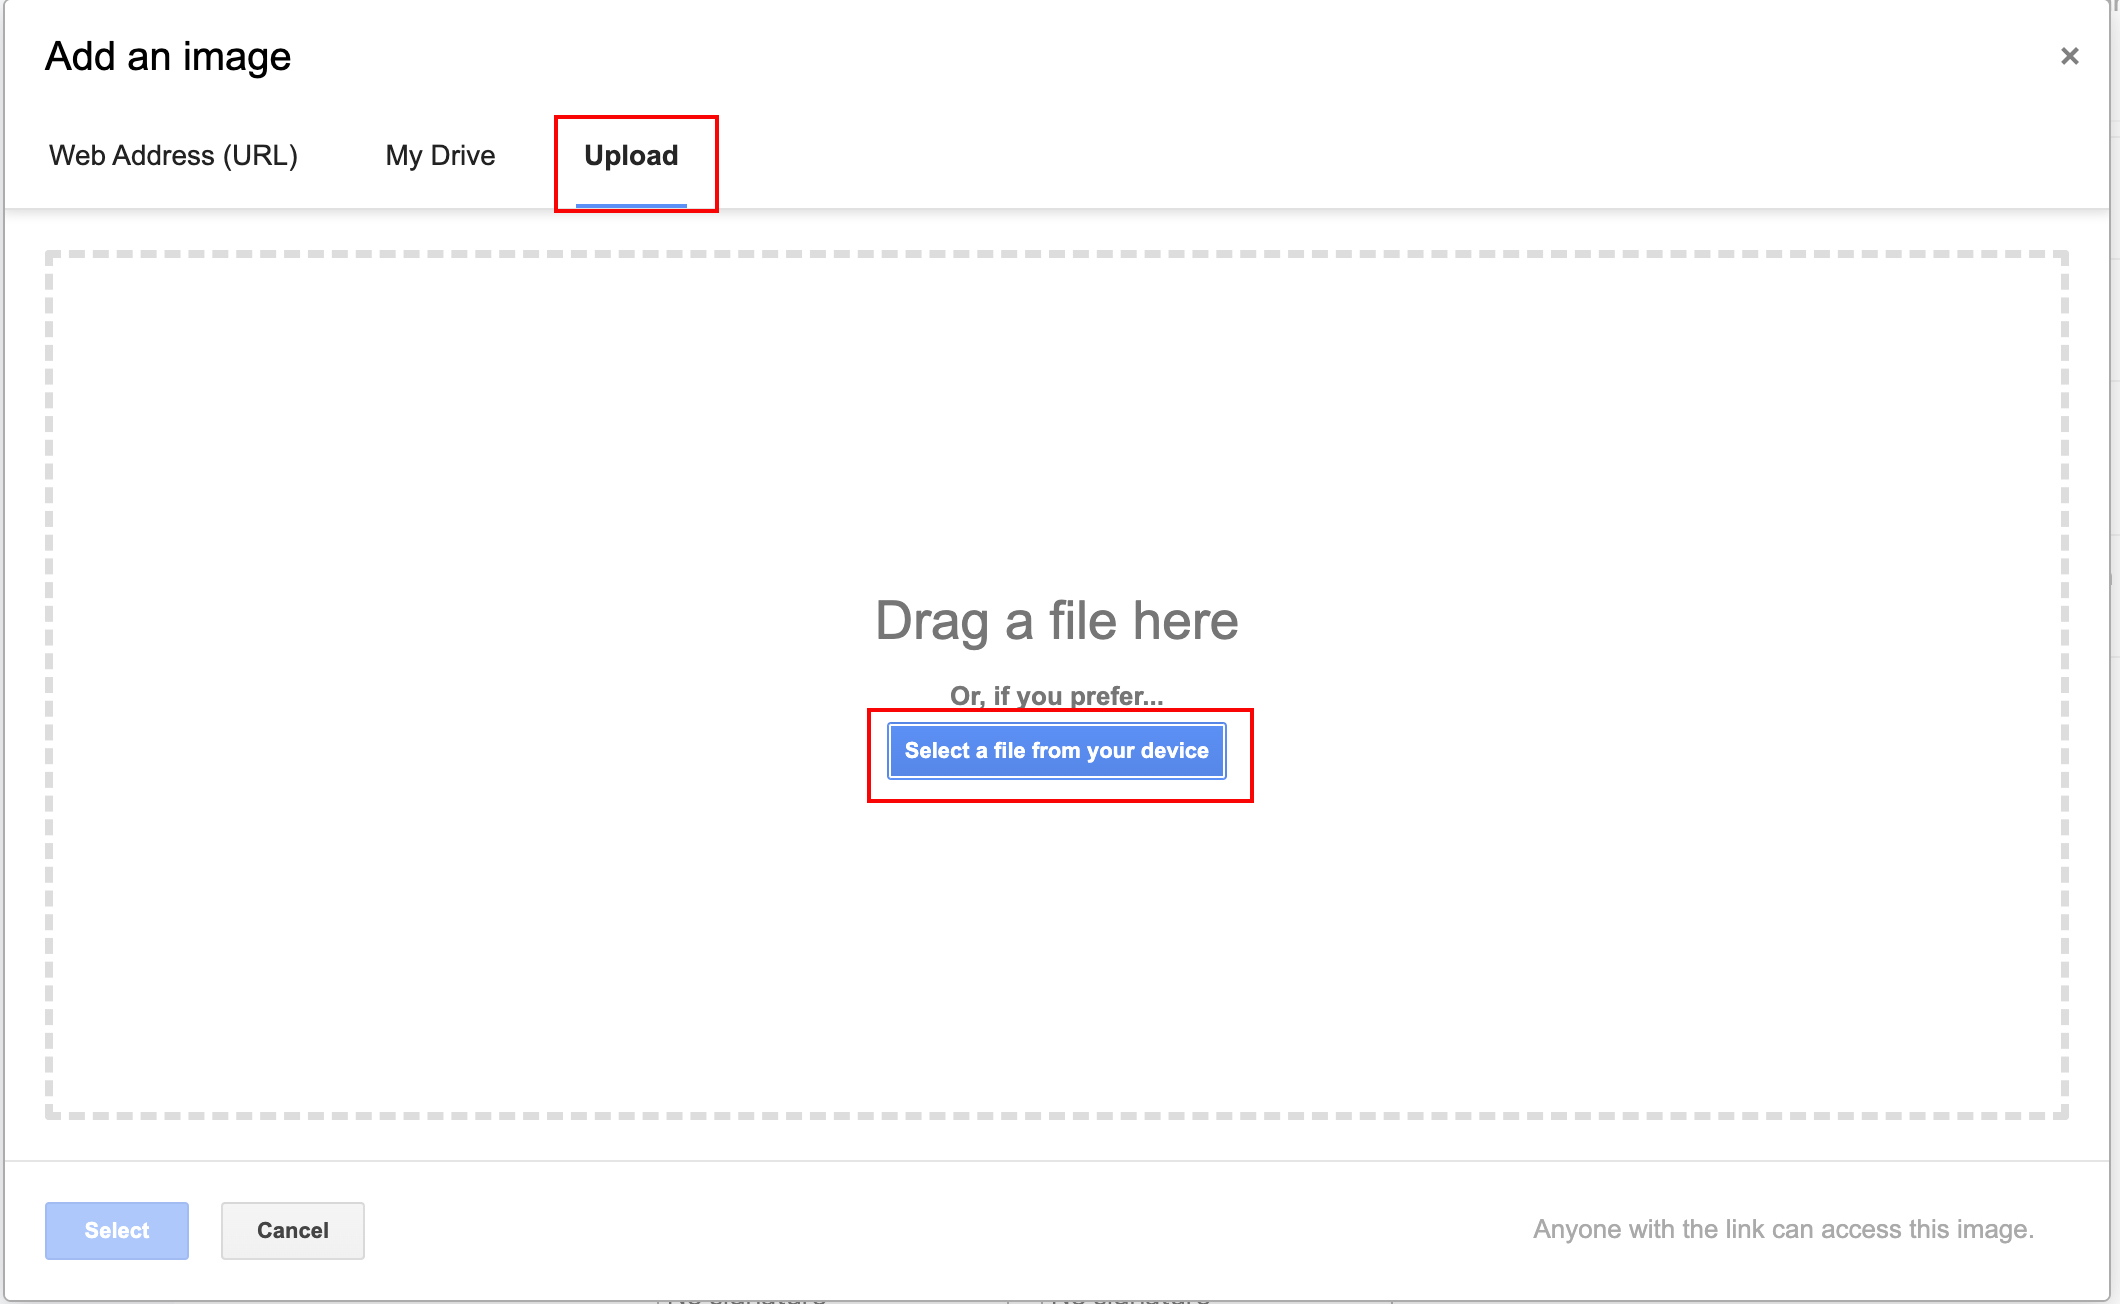 screenshot of gmail signature insert image settings with red box around upload and select a file from your device.